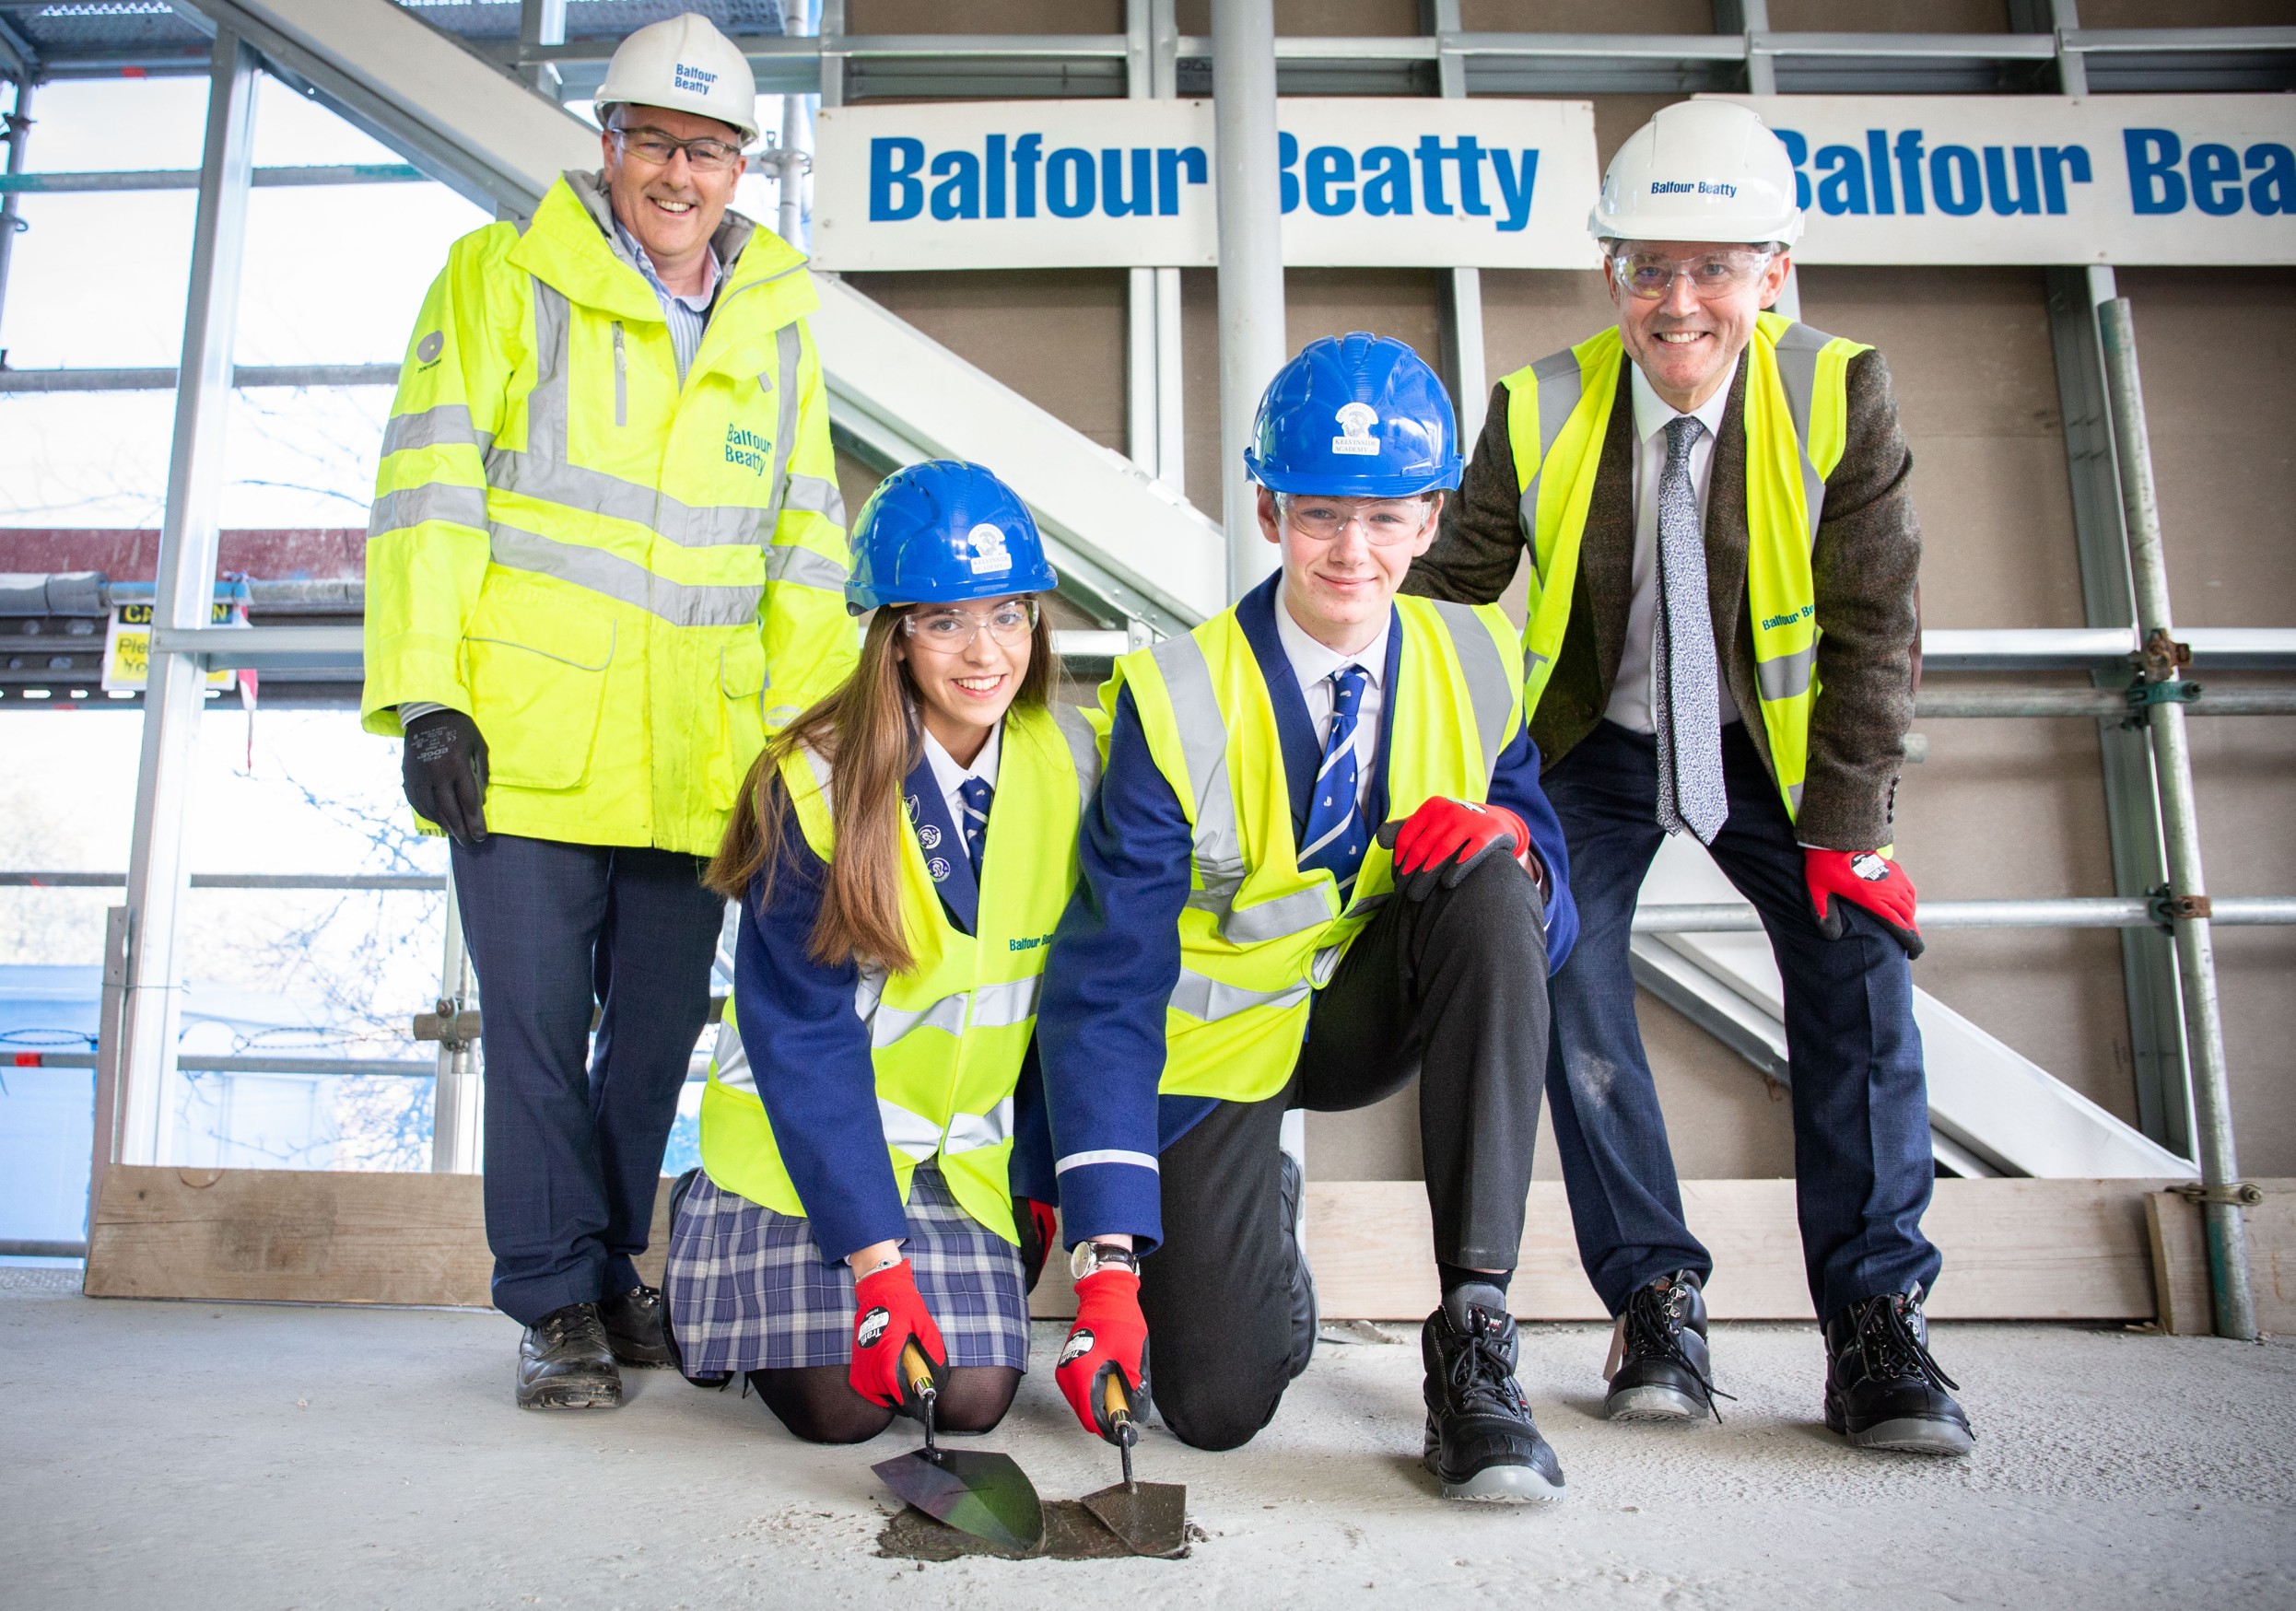 Balfour Beatty to build ‘school of innovation’ at Kelvinside Academy